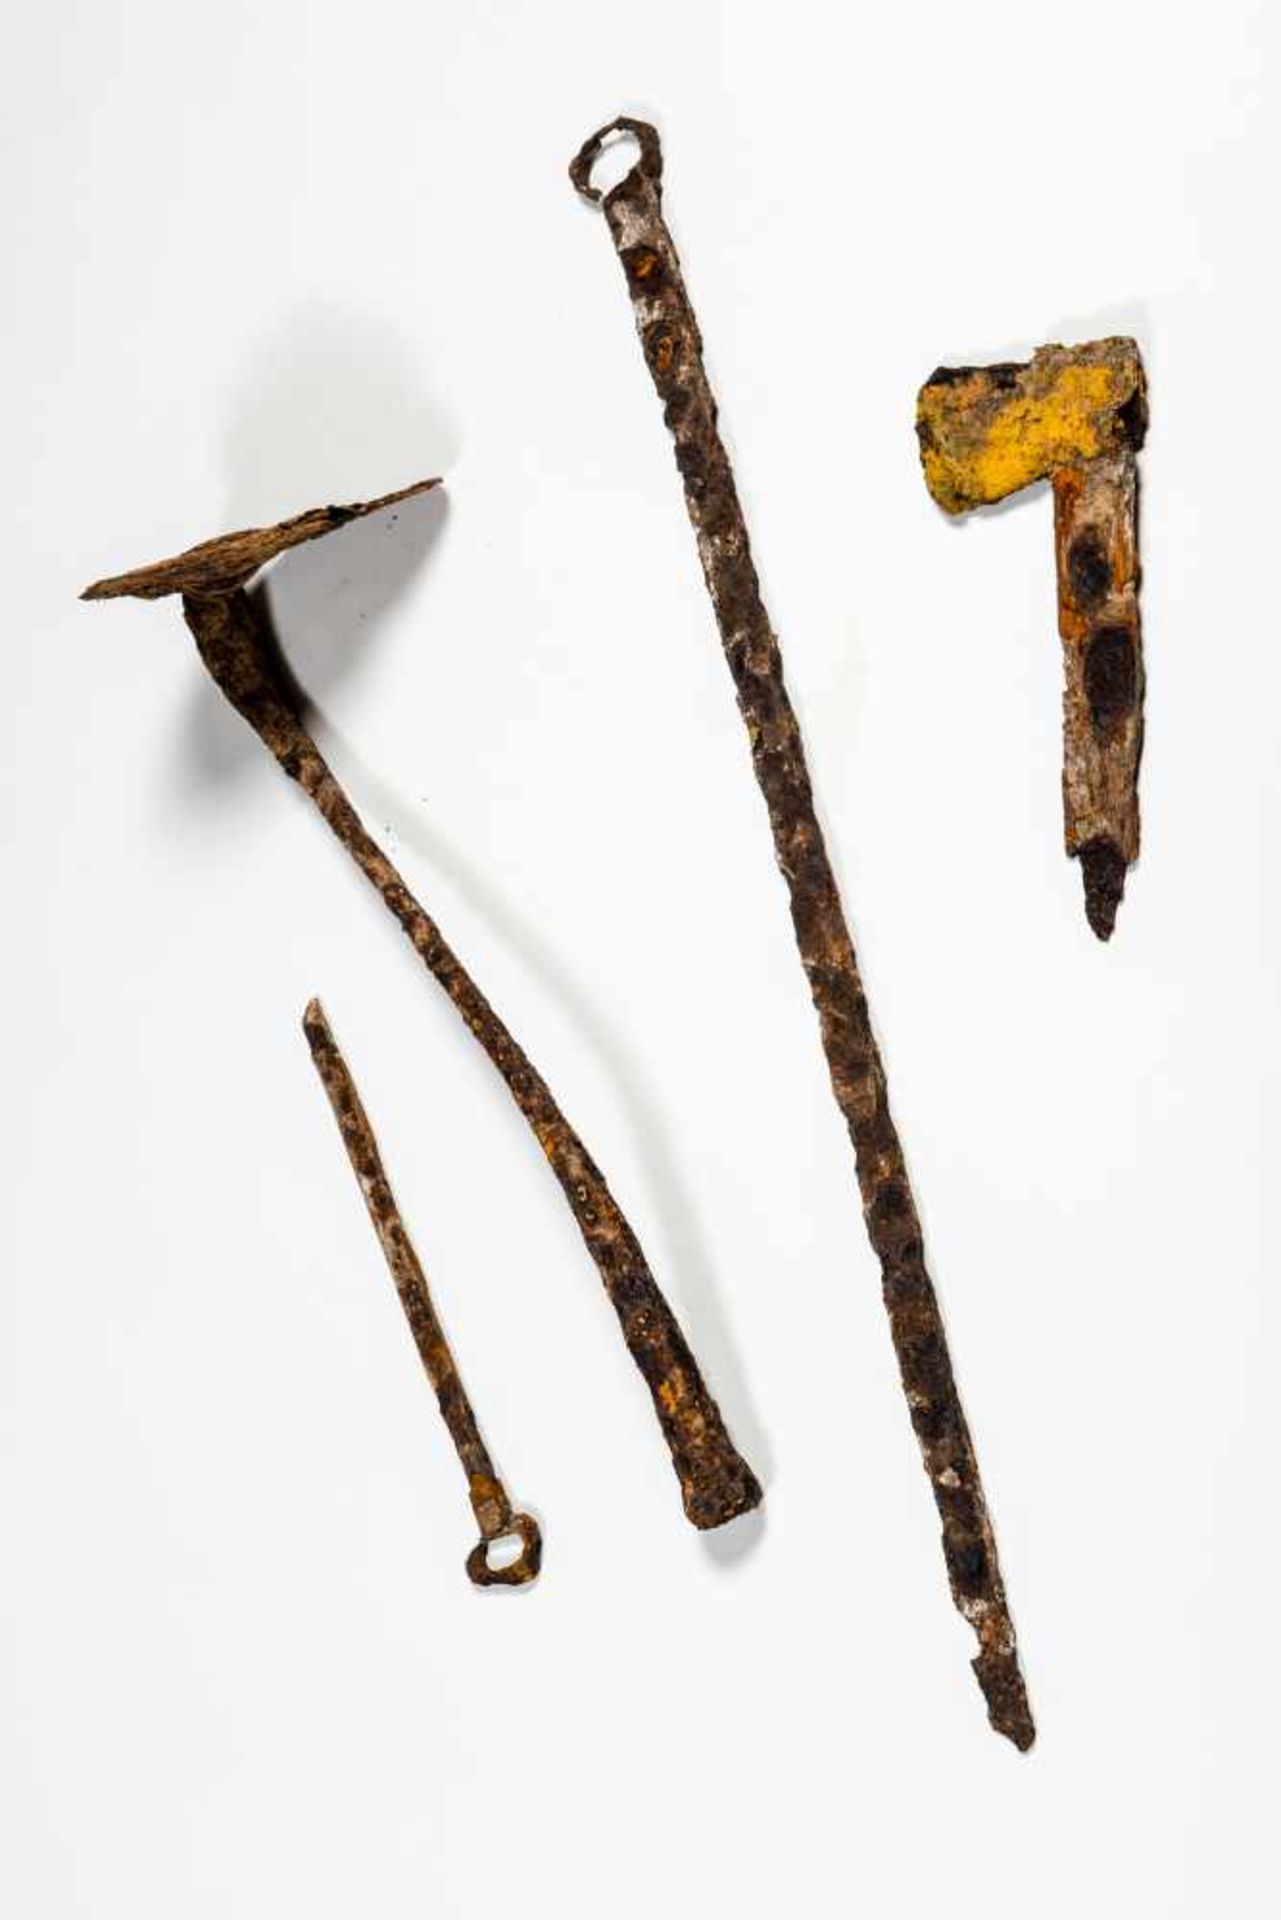 RARE COLLECTION OF IRON TOOLSIronChina, c. Han (206 BC-220 AD) to Northern Wei dynasty (385-535)In - Image 4 of 7